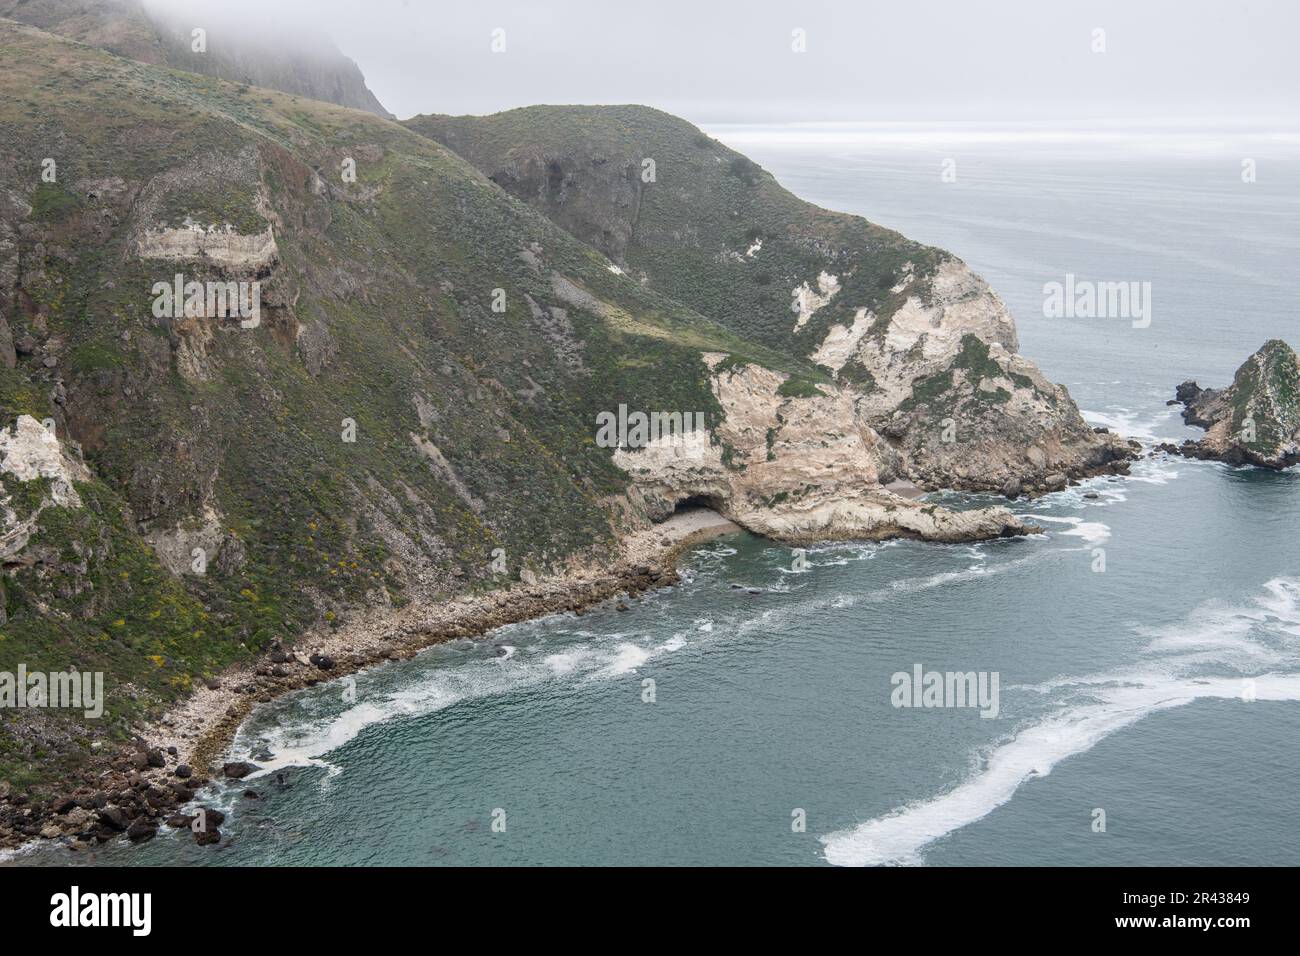 The dramatic coastline of Santa Cruz island in the Channel islands National Park, the landscape includes cliffs and the pacific ocean. Stock Photo